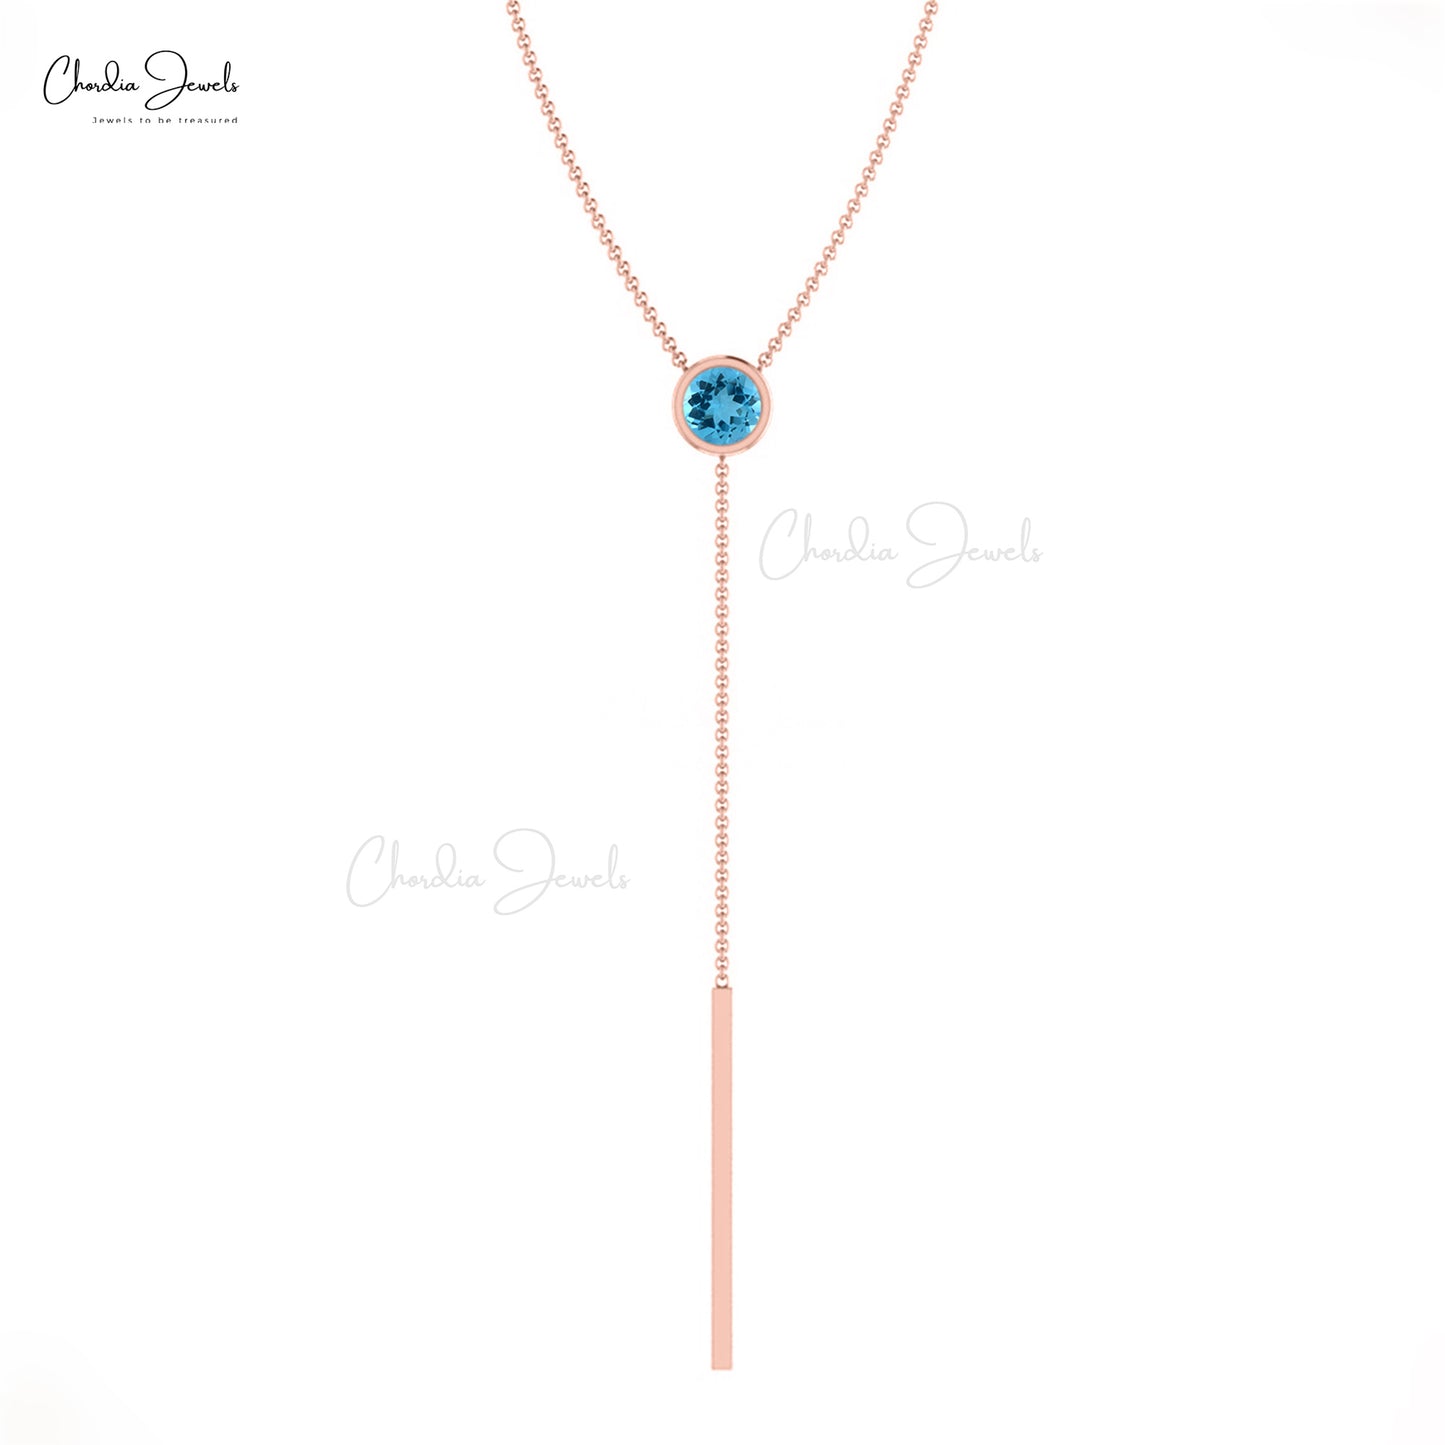 Real 14k Gold Y-Shaped Necklace With Swiss Blue Topaz Gemstone